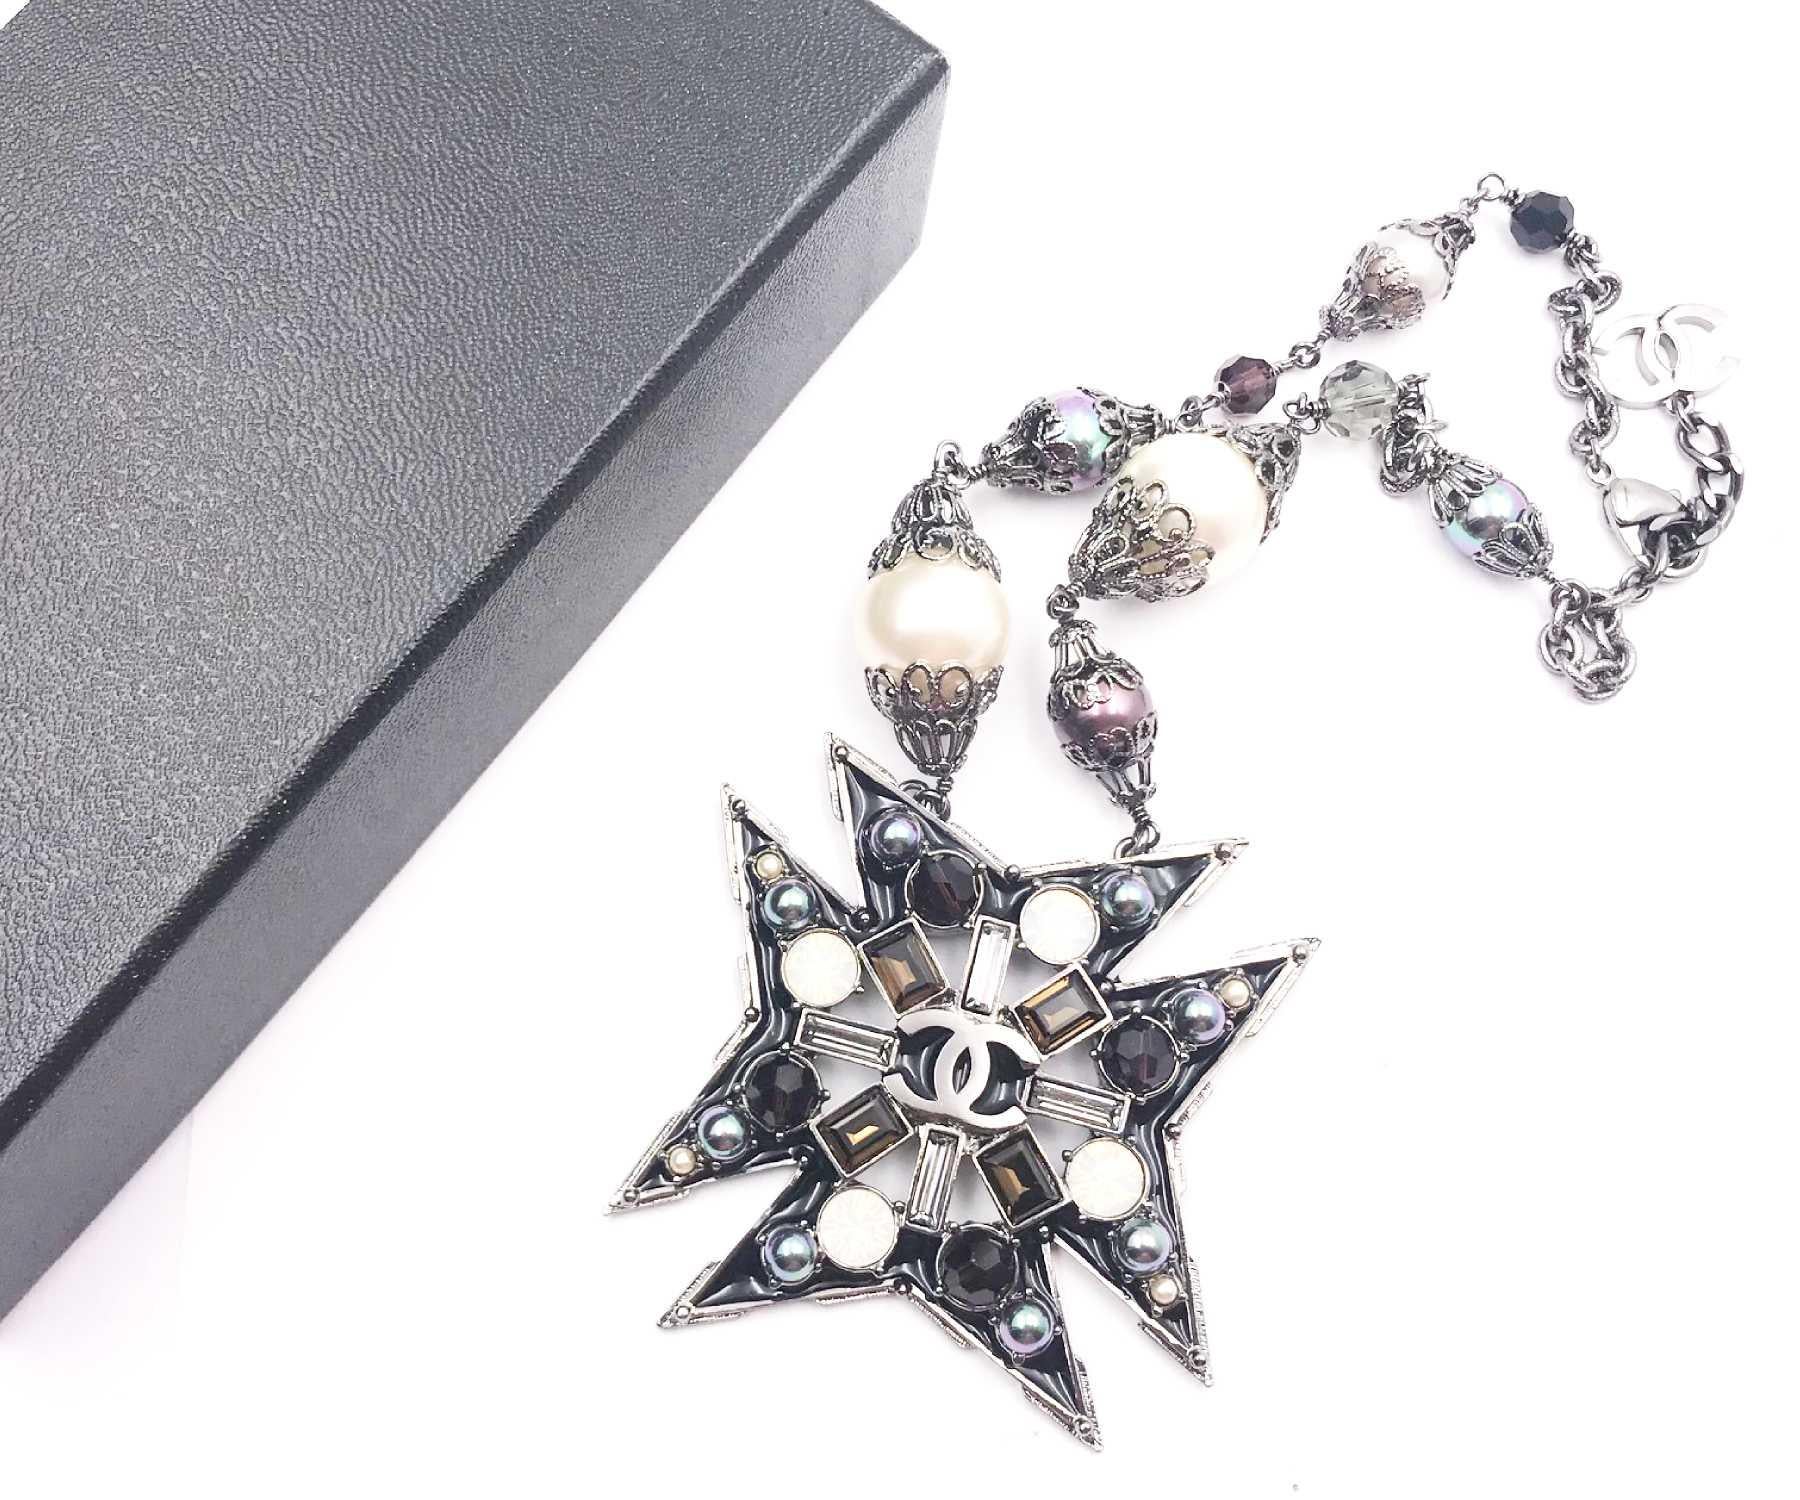 Chanel Rare Gunmetal Star Multi Color Stone Faux Pearl Necklace

*Marked 05
*Made in France
*Comes with original box

-The pendant is approximately 3″ x 3″.
-The necklace is approximately 16.5″ to 17.5″ total, adjustable length.
-This necklace is